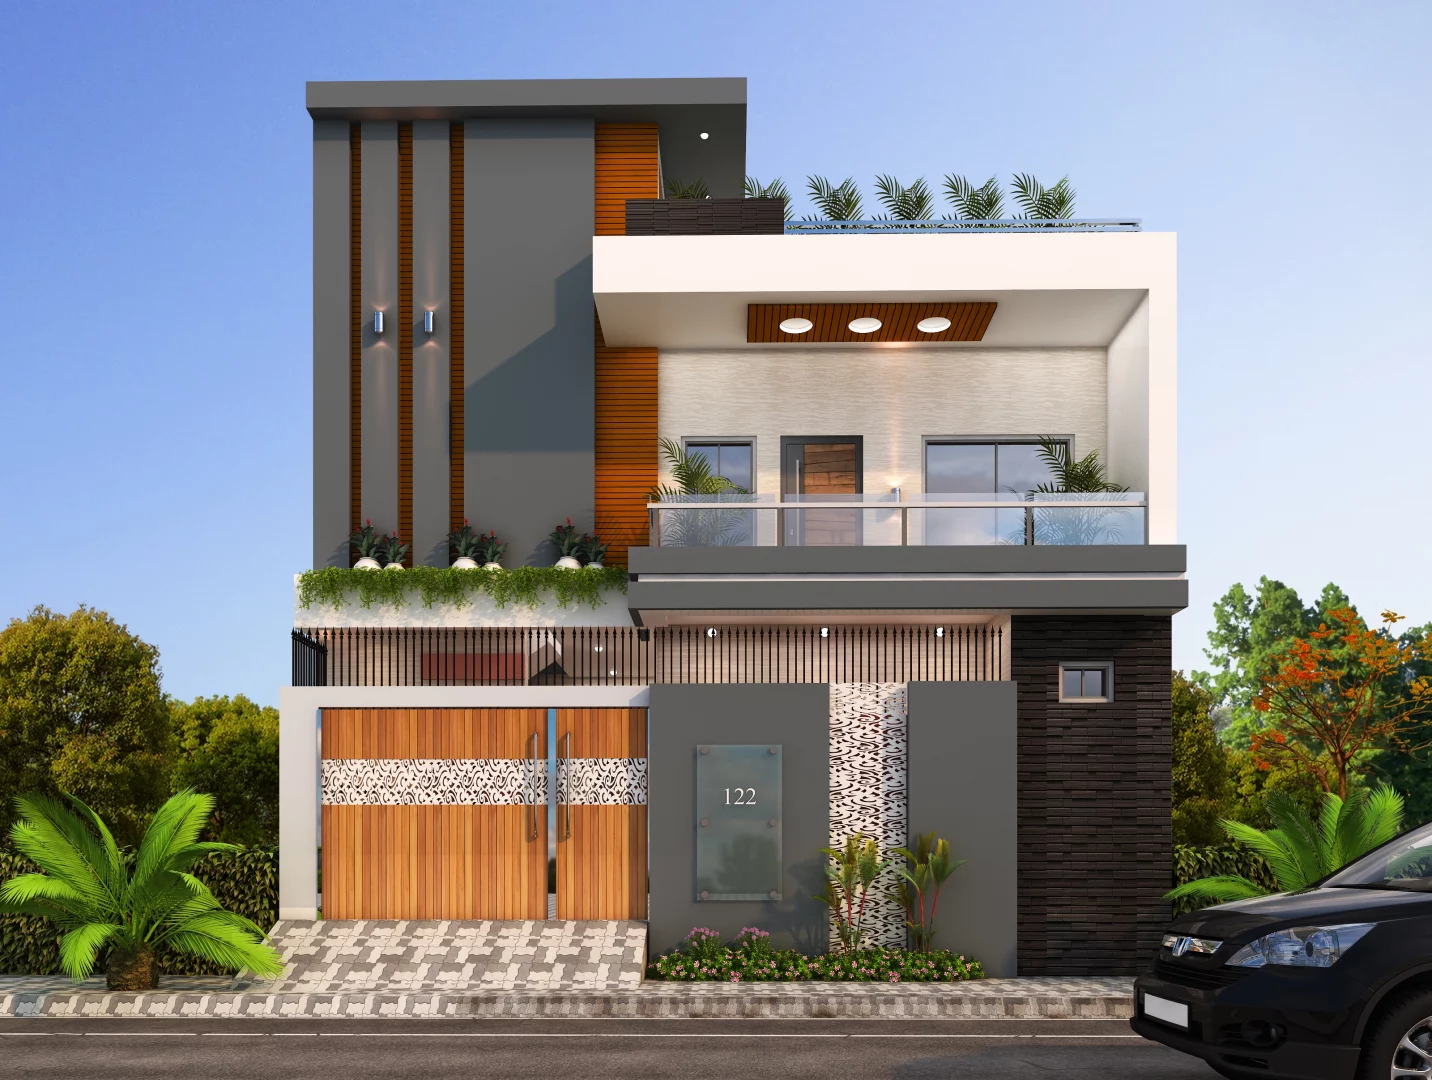 3d front elevation design with a chic modern look. 